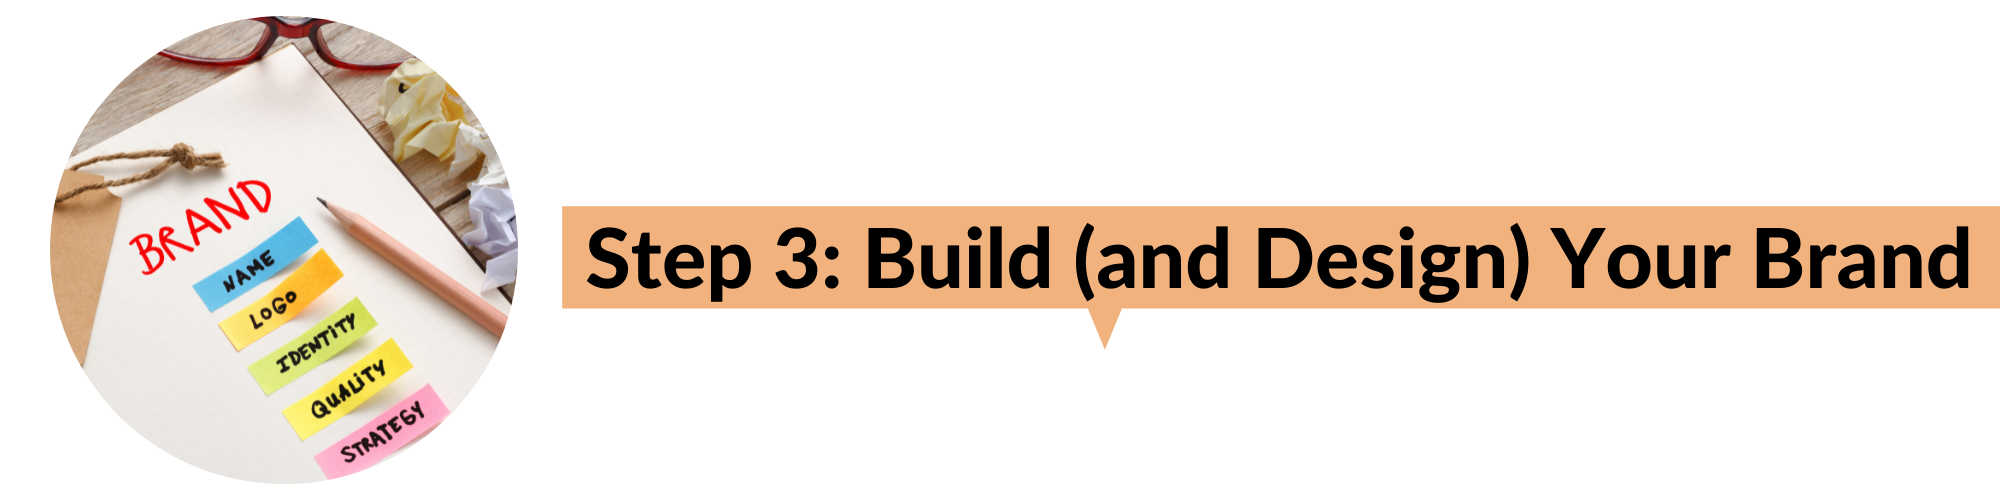 Step Three: Build (and Design) Your Brand